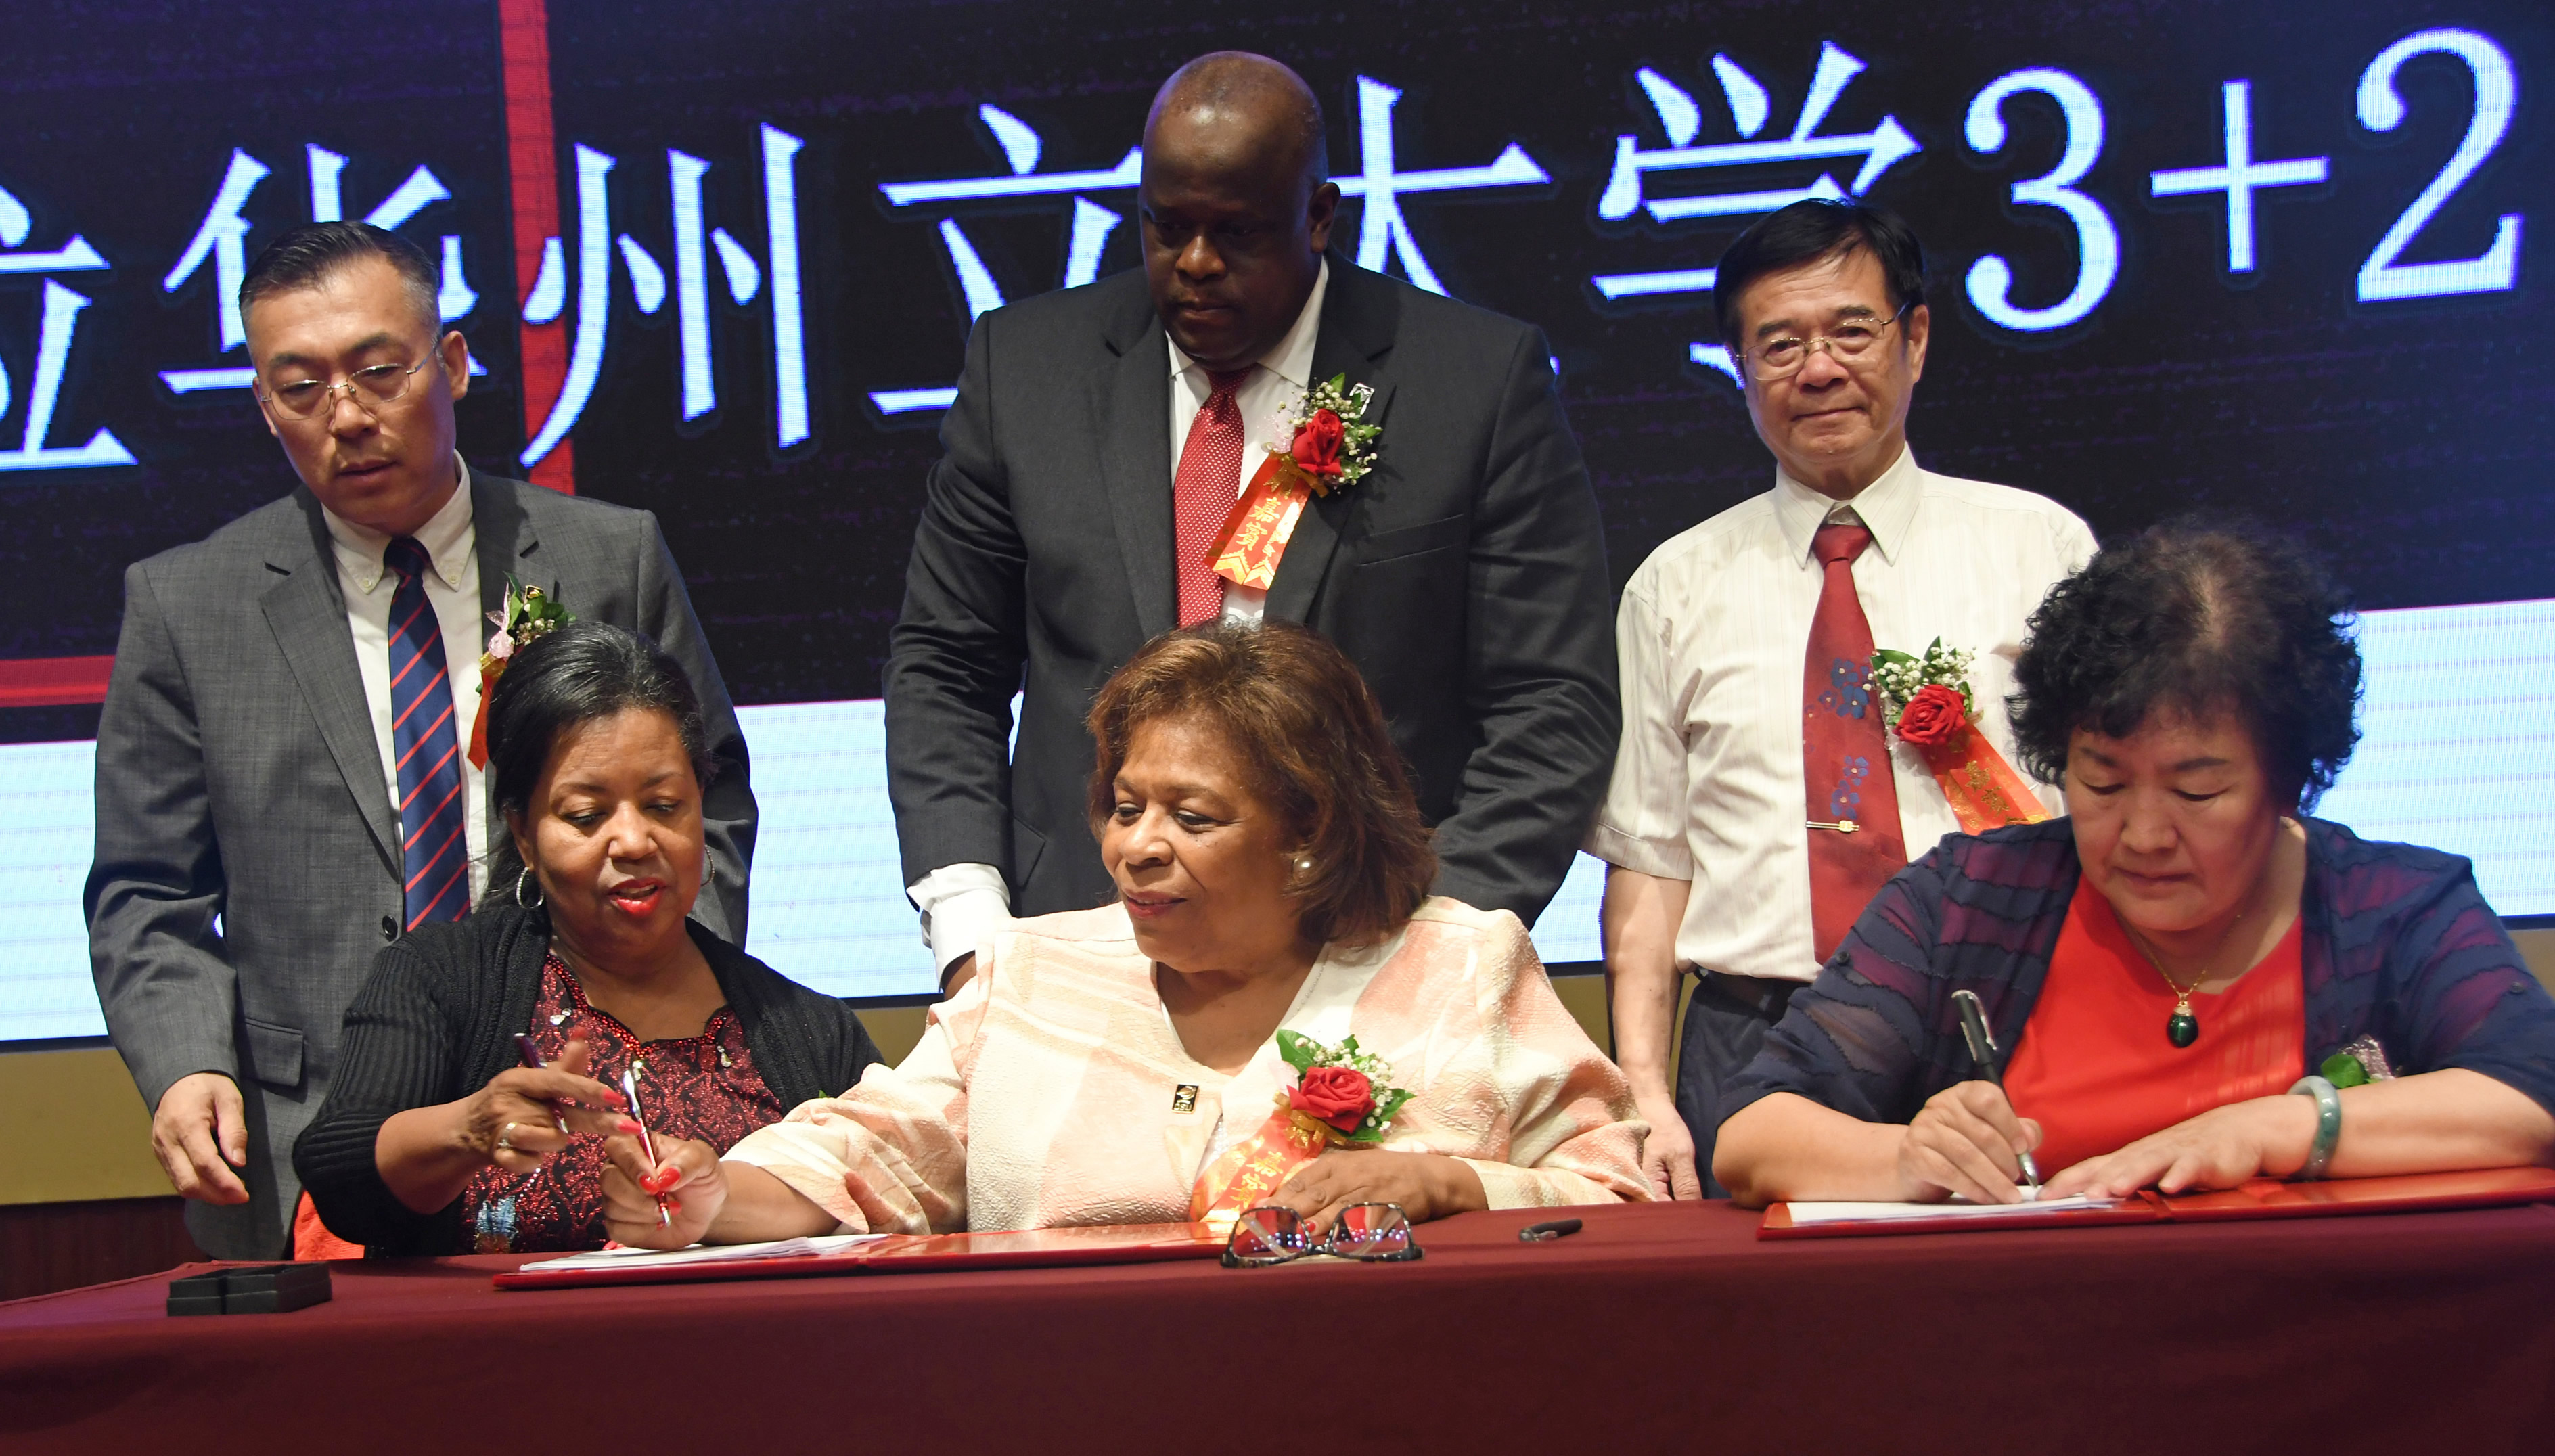 New partnership established with college in Guangzhou, China